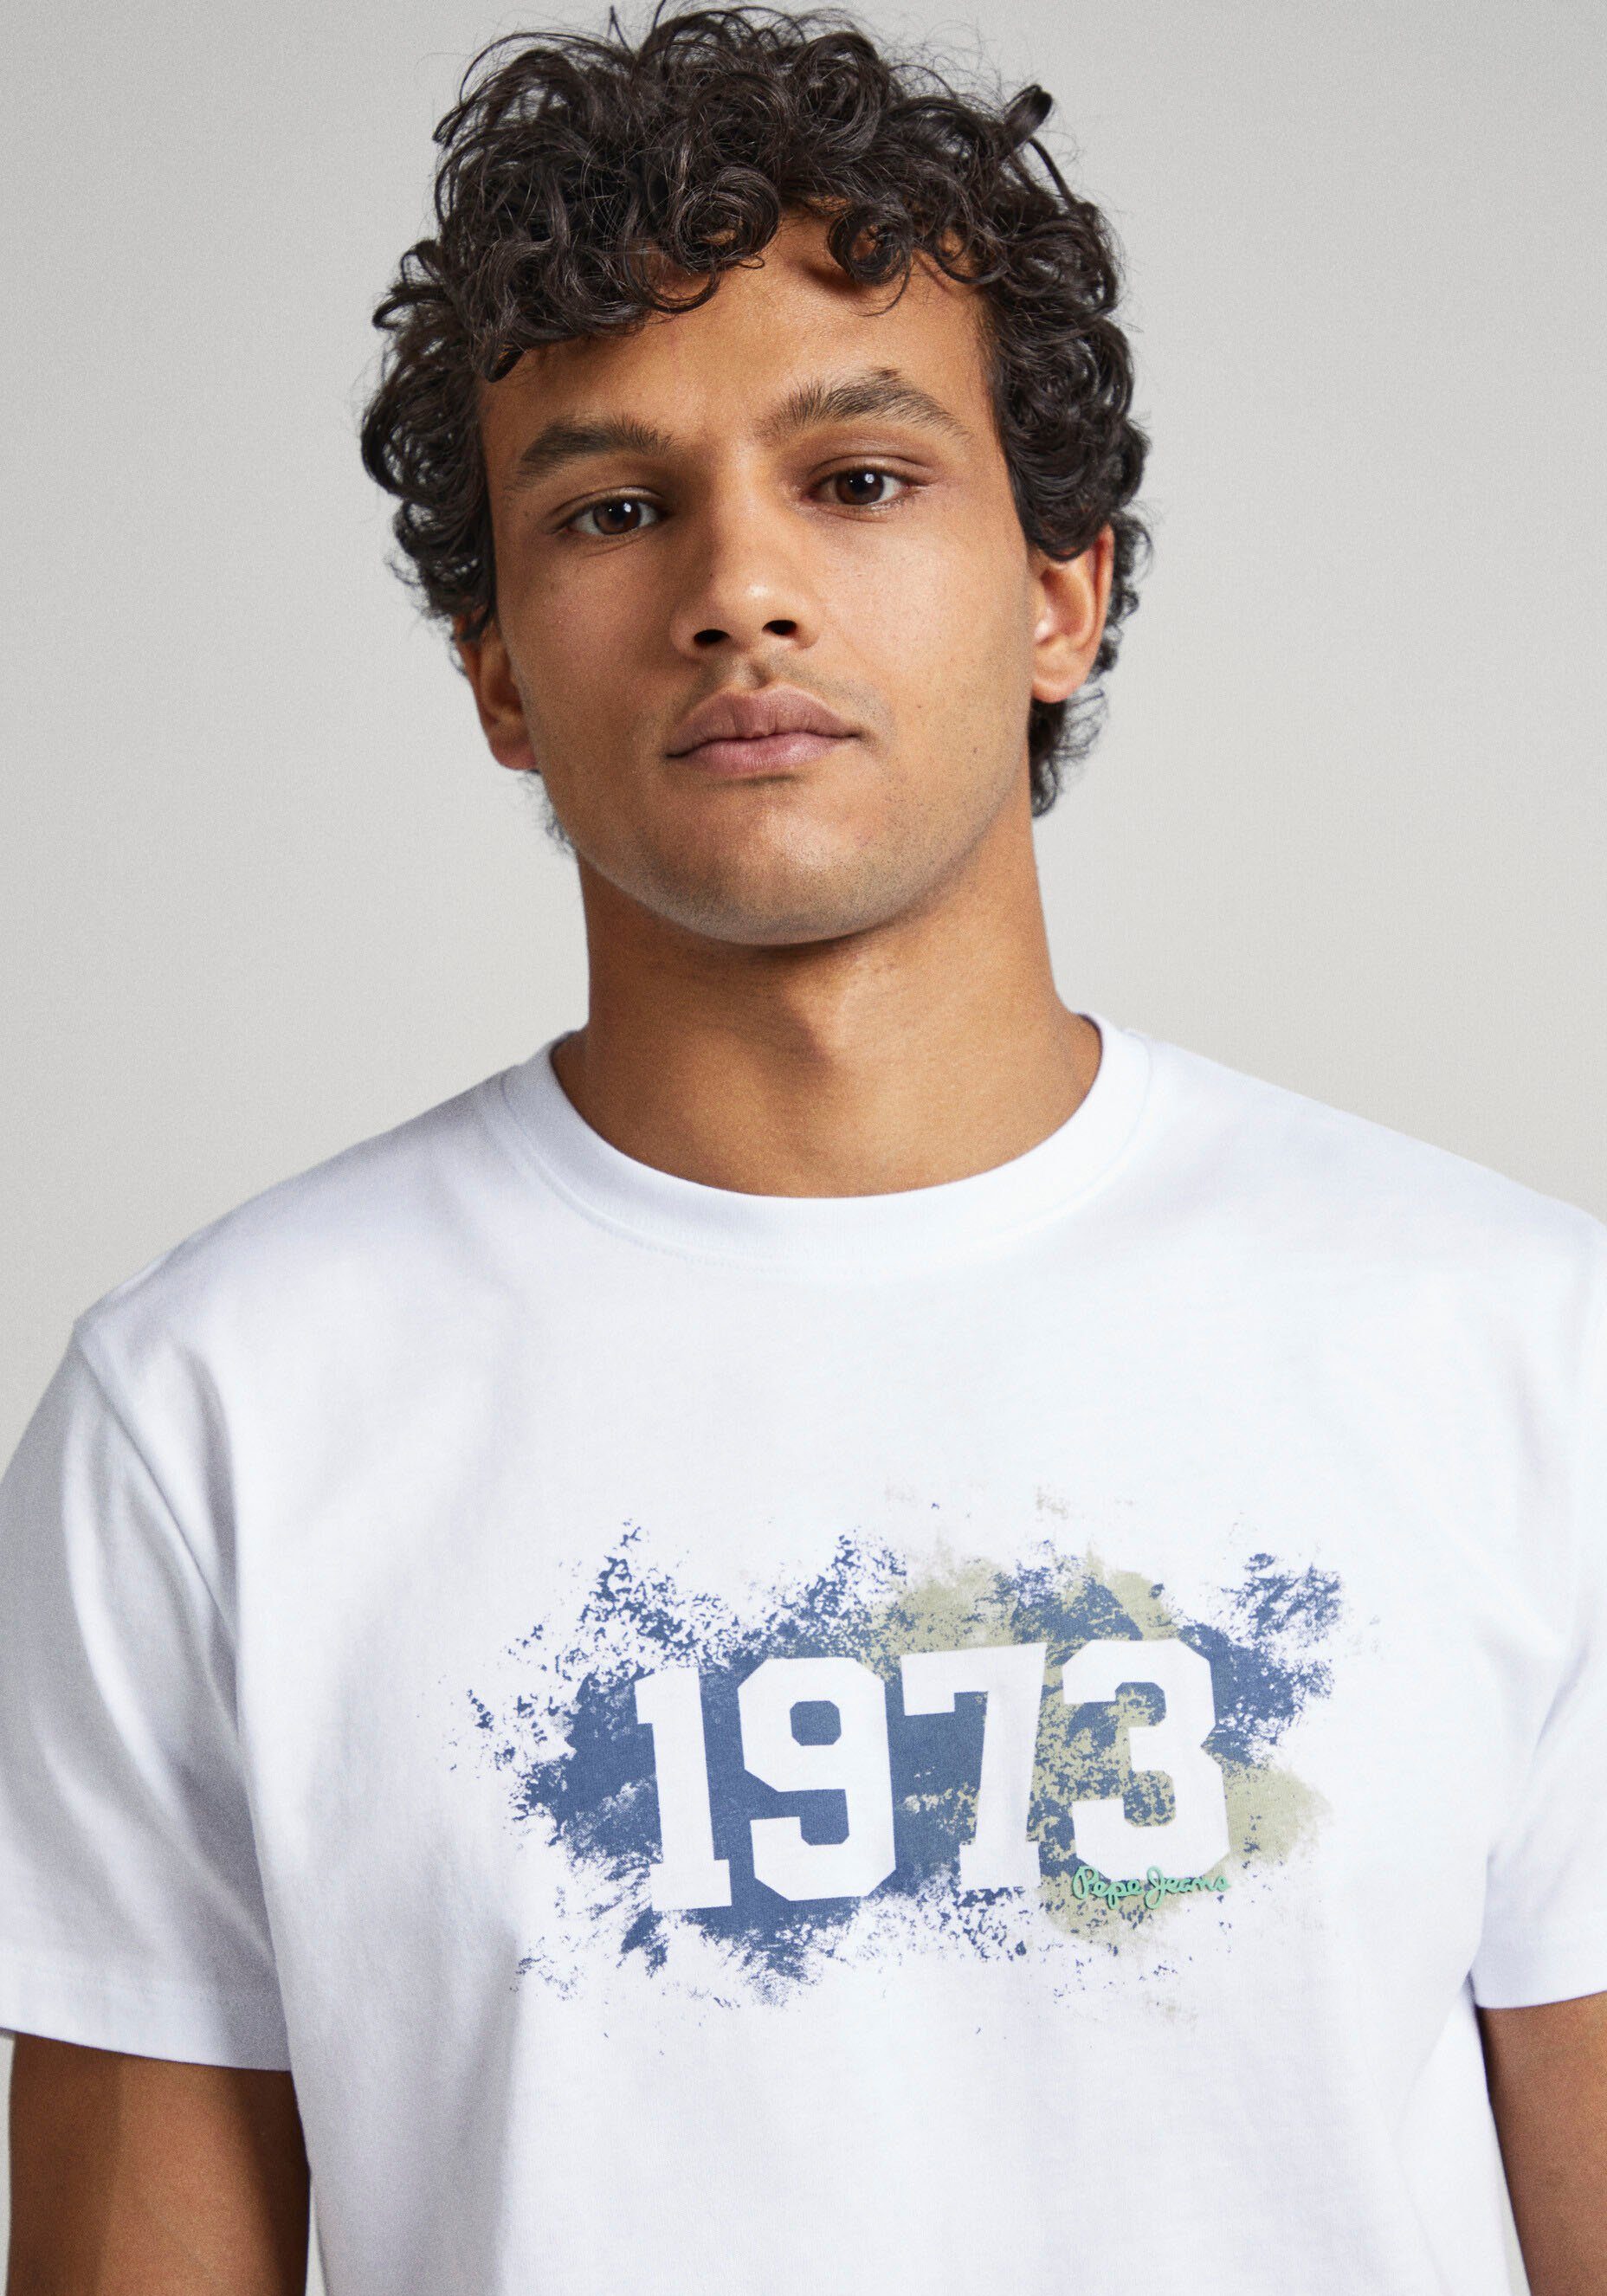 Pepe WOLF off Jeans Print-Shirt white